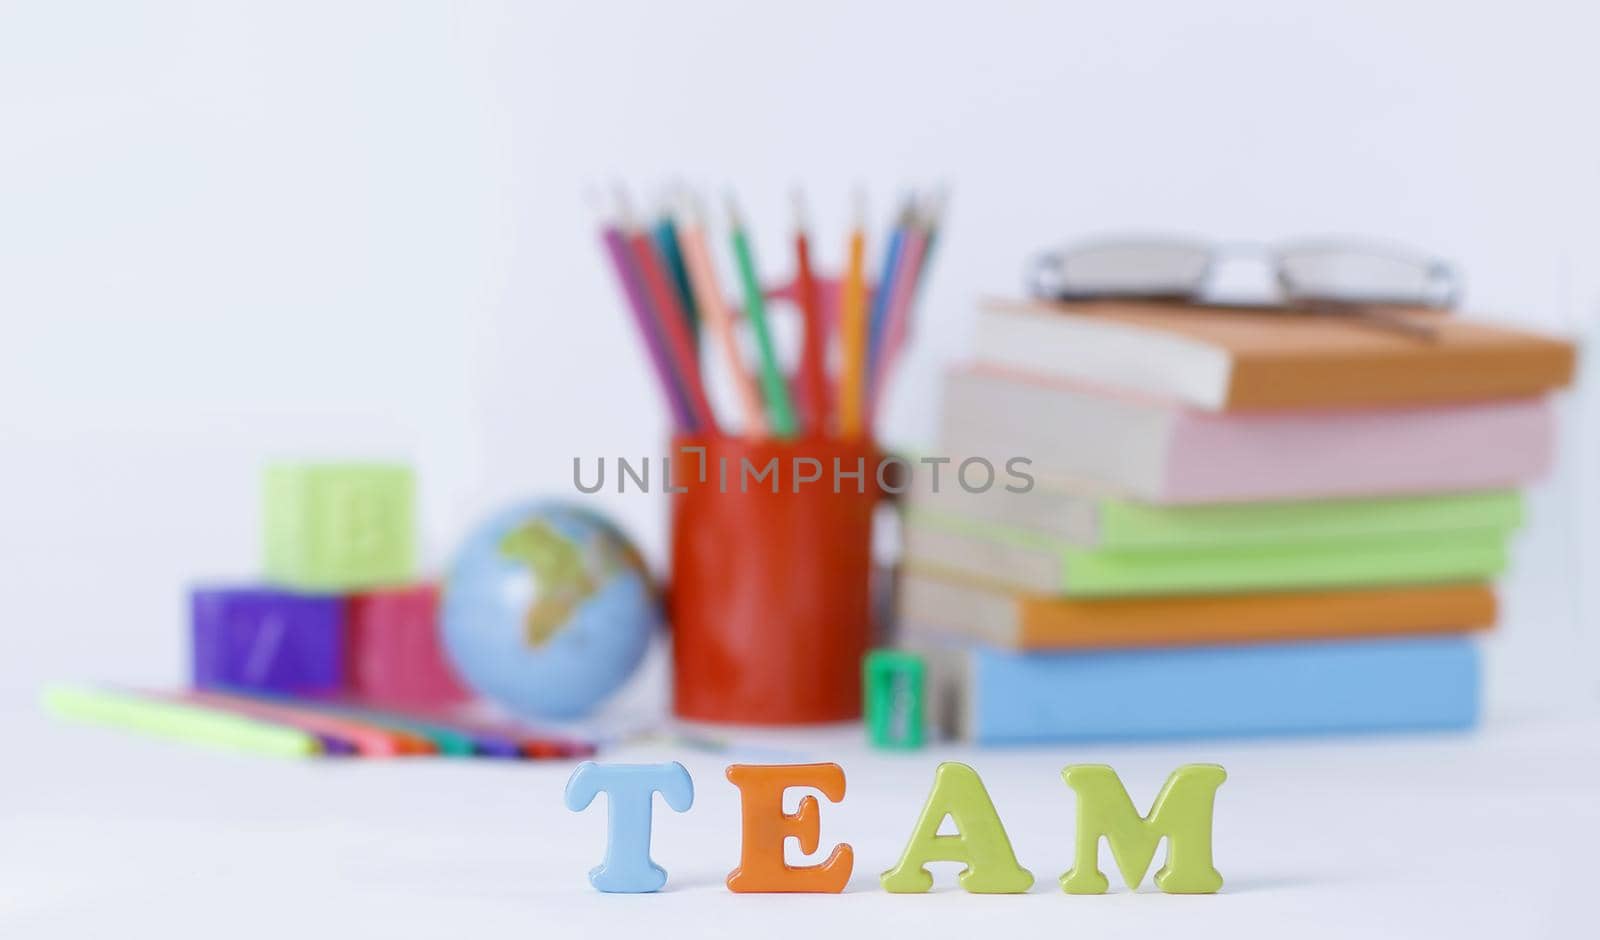 word team on blurred background of school supplies .photo with c by SmartPhotoLab